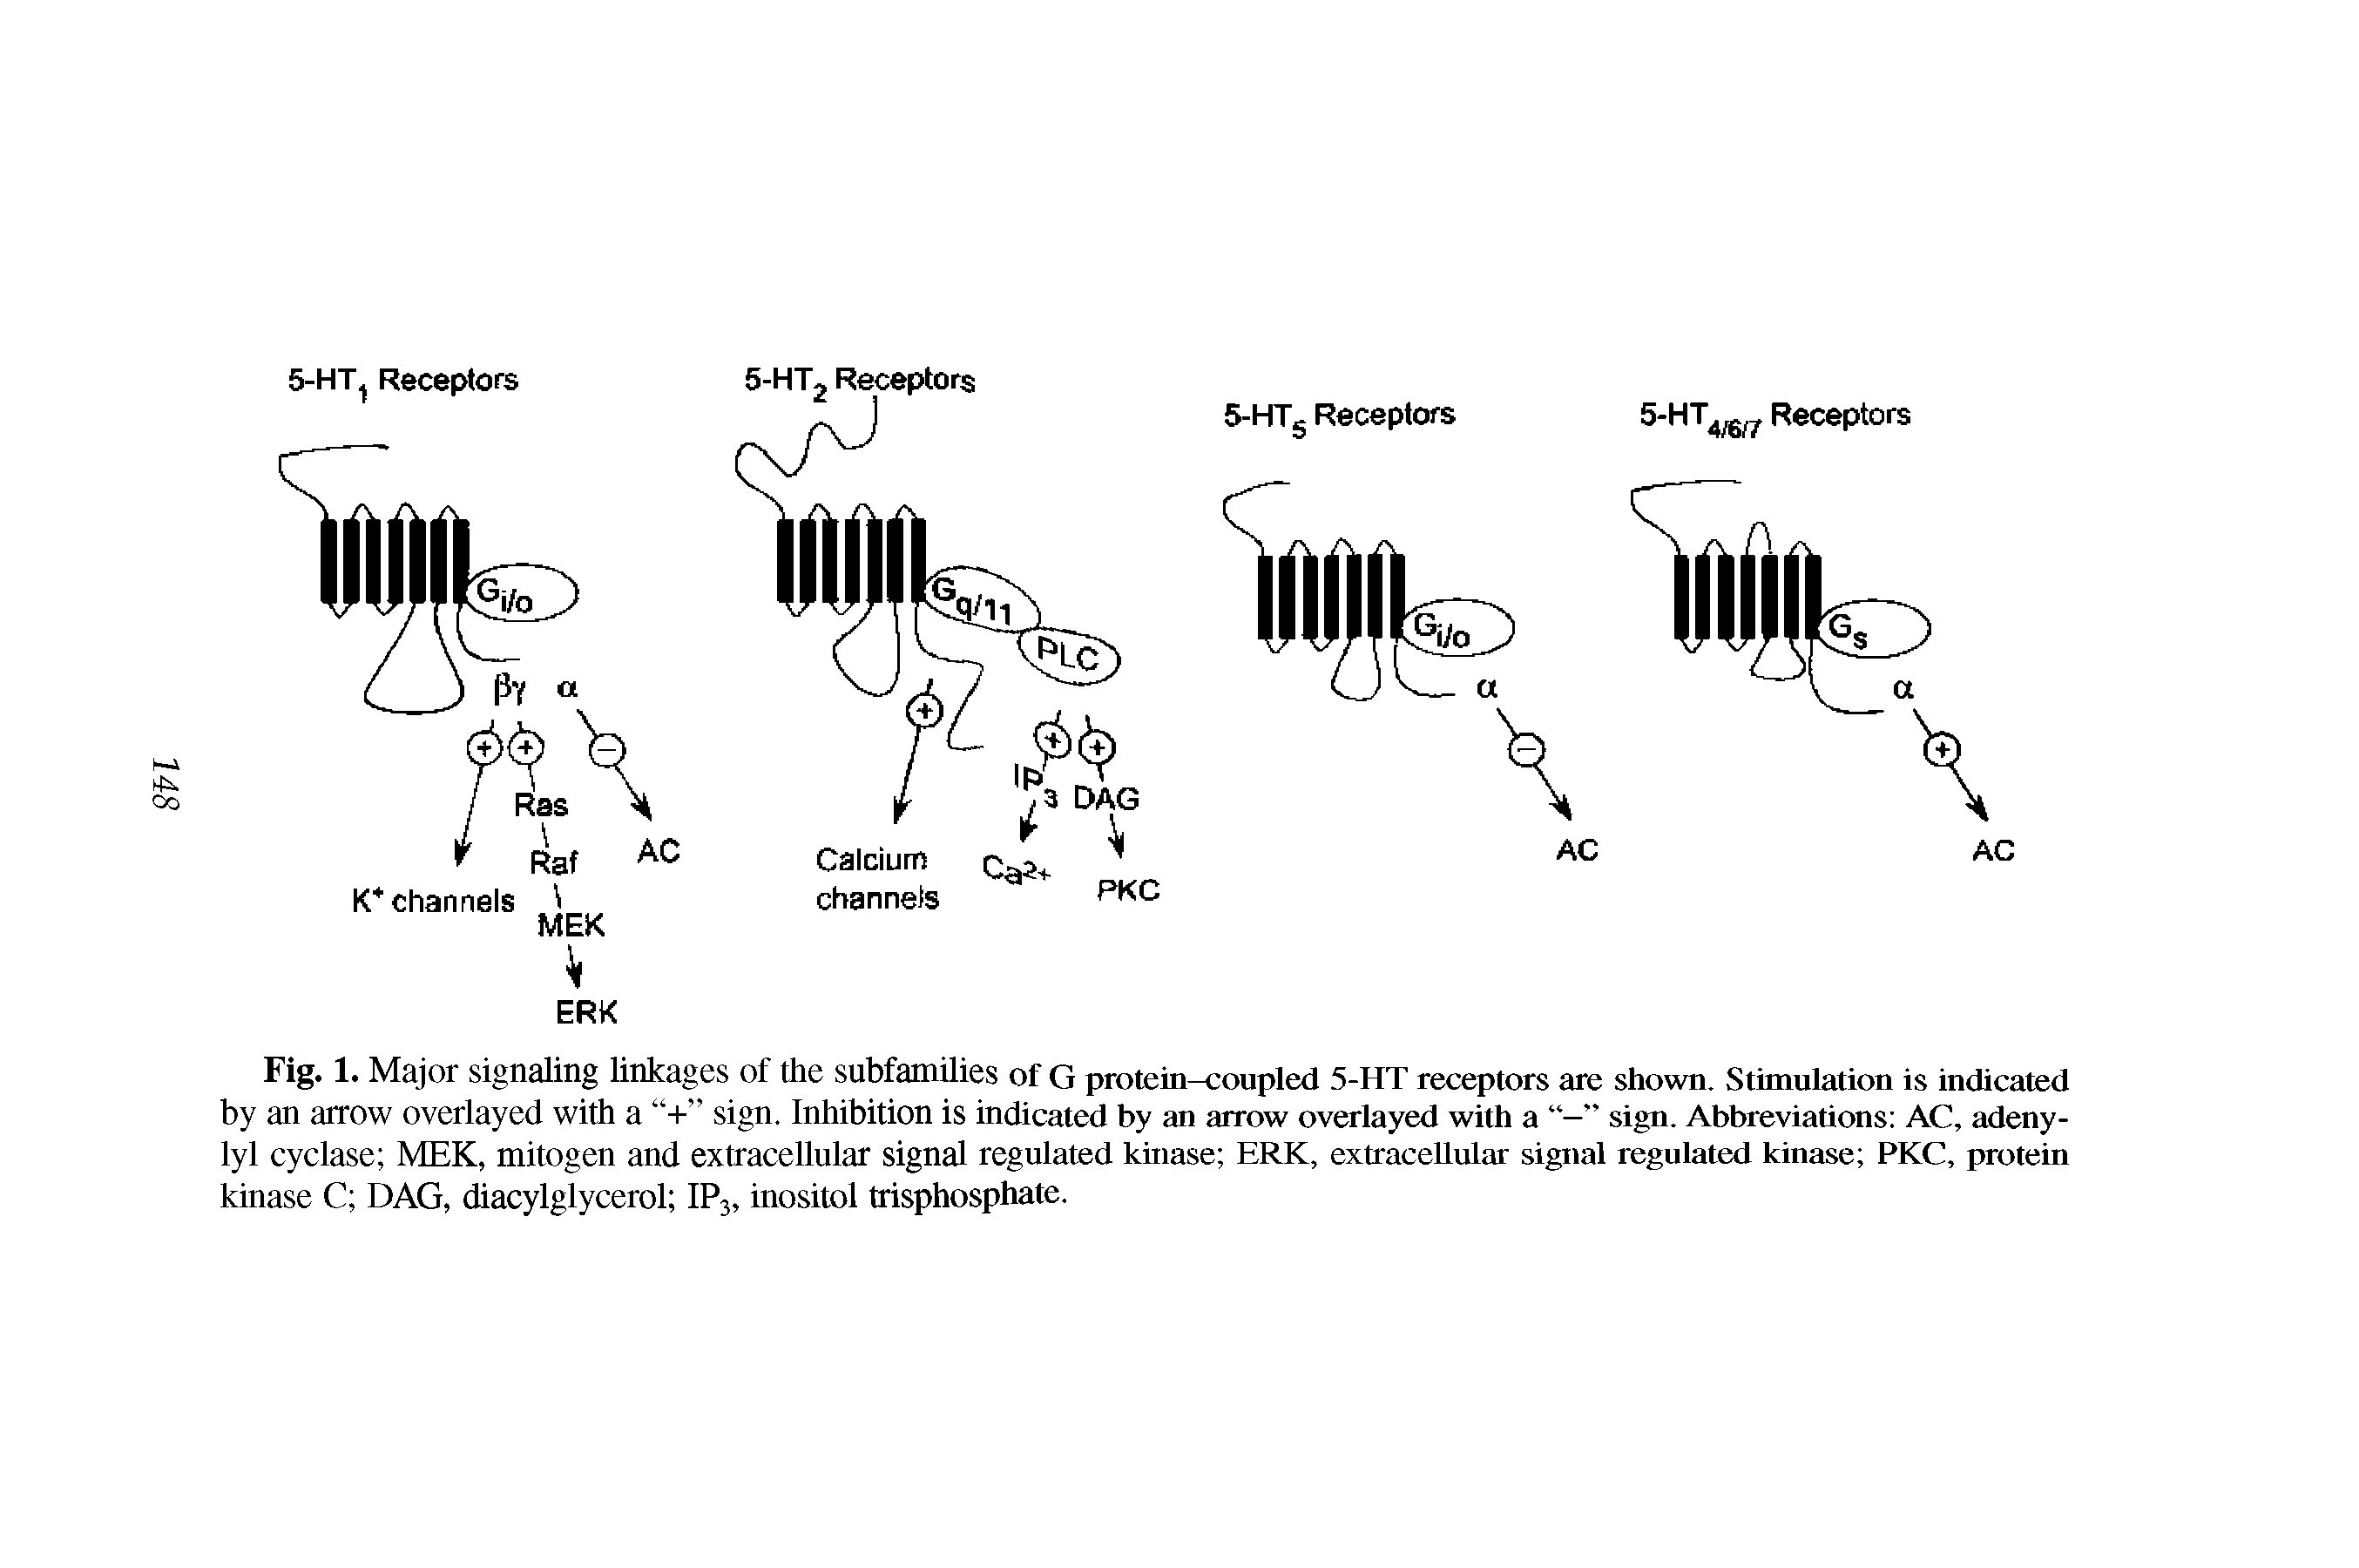 Fig. 1. Major signaling linkages of the subfamilies of G protein-coupled 5-HT receptors are shown. Stimulation is indicated by an arrow overlayed with a + sign. Inhibition is indicated by an arrow overlayed with a sign. Abbreviations AC, adeny-lyl cyclase MEK, mitogen and extracellular signal regulated kinase ERK, extracellular signal regulated kinase PKC, protein kinase C DAG, diacylglycerol IP3, inositol trisphosphate.